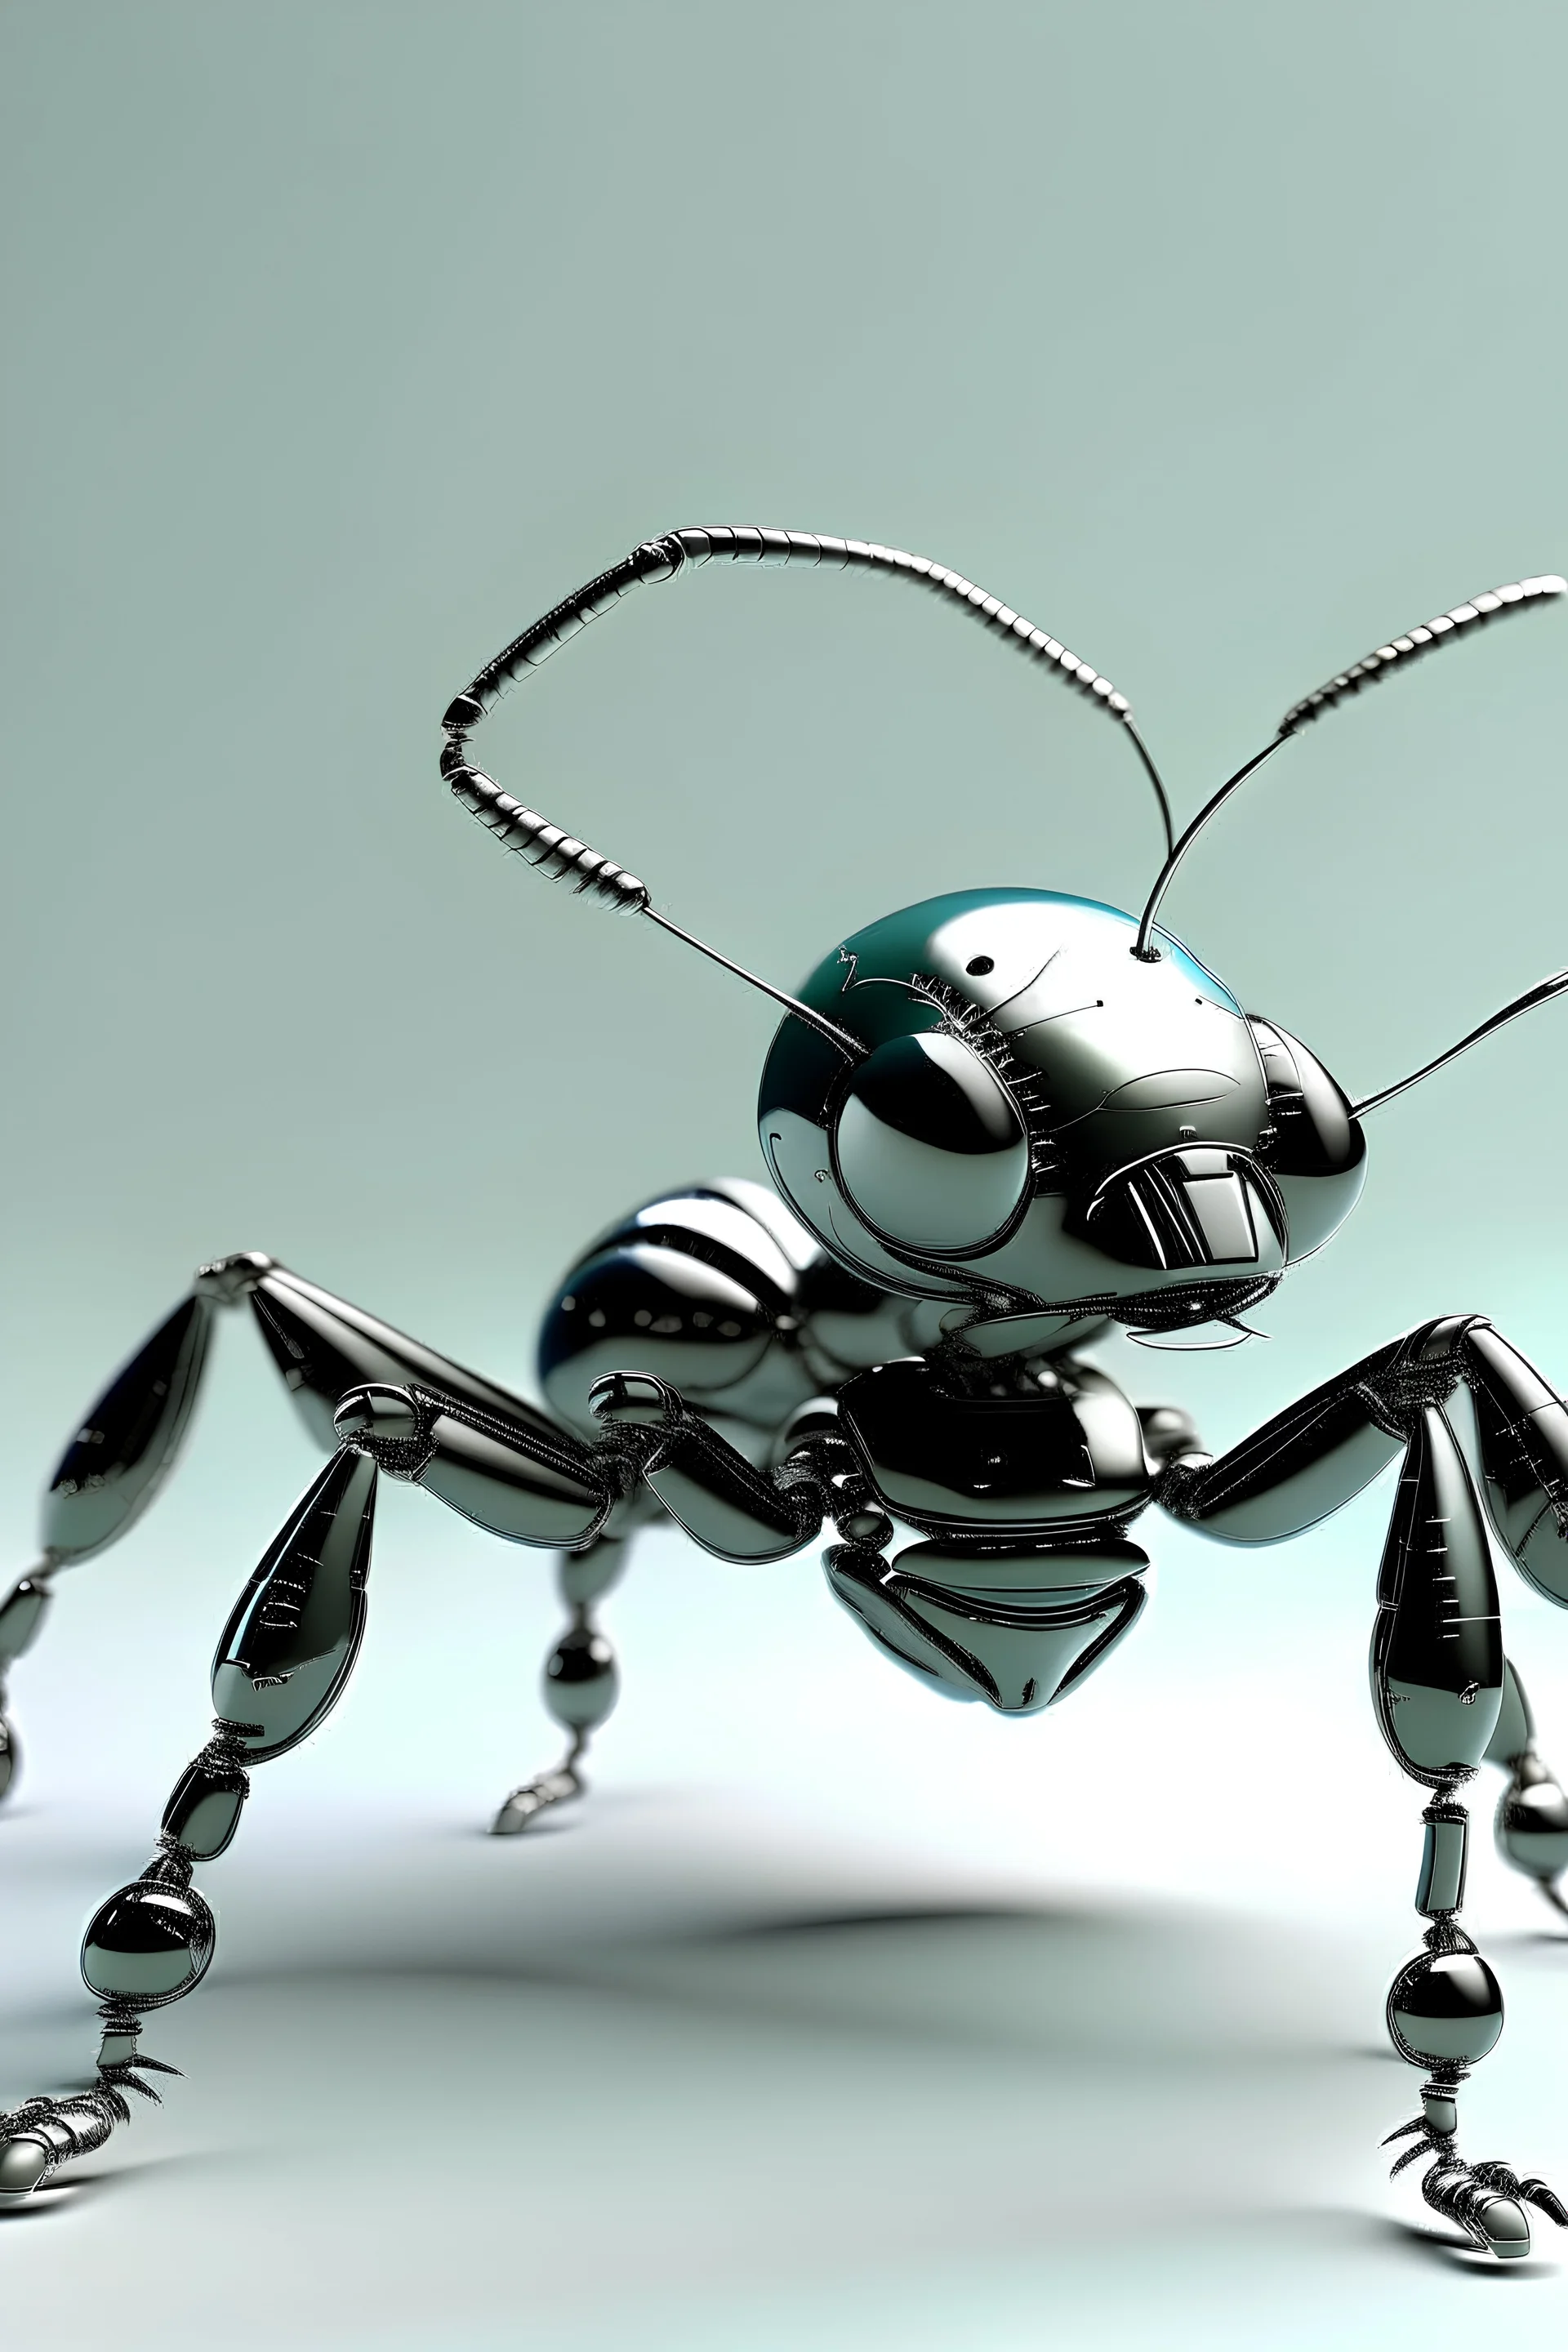 ant-shaped robot